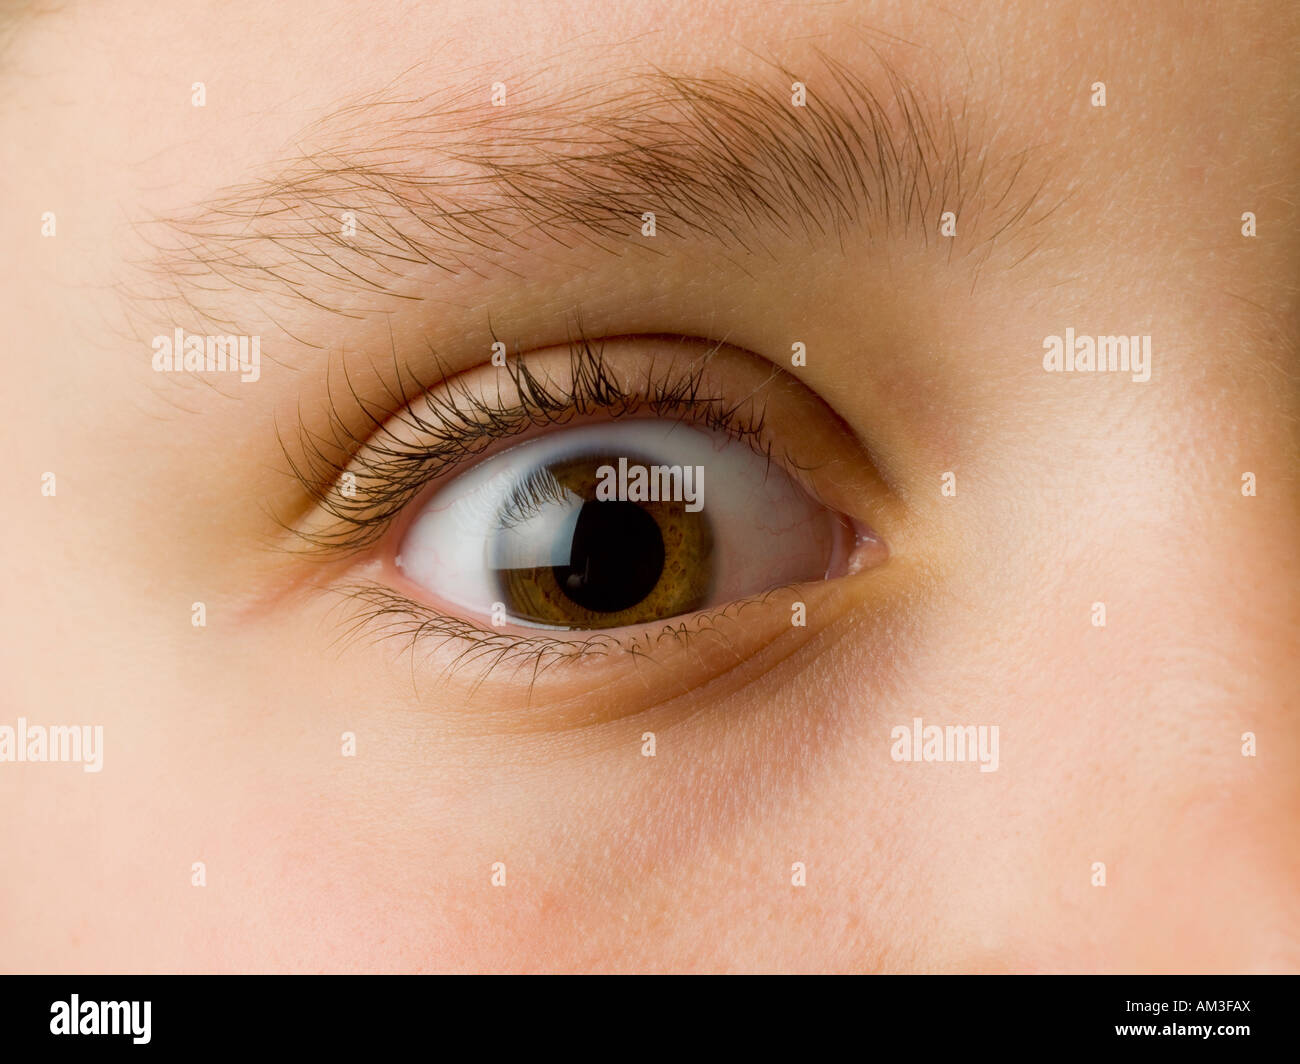 Close-up of a brown eye with long black lashes on a Caucasian face. Stock Photo